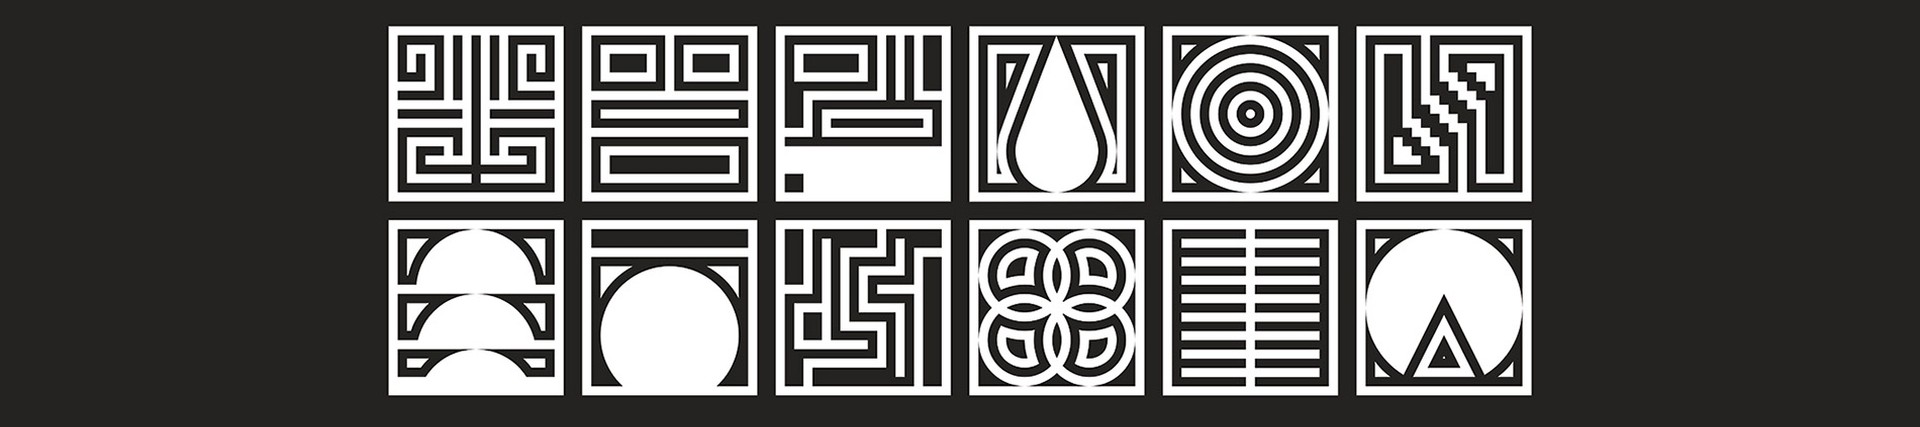 White geometric designs set out as two rows of six tiles on a black background.